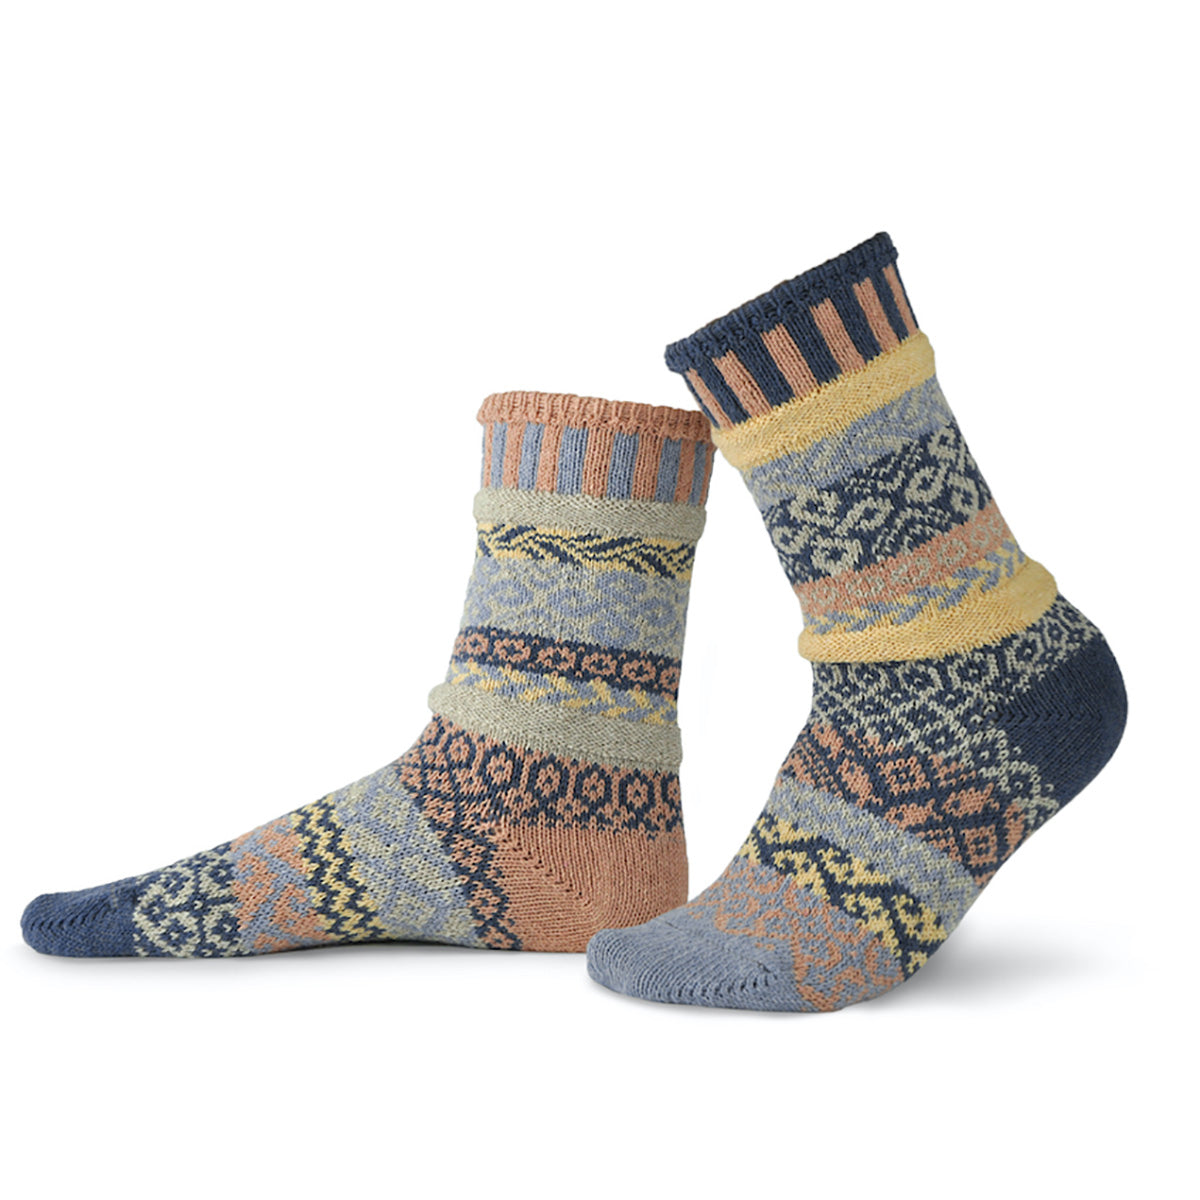 Cozy mismatched pattern socks in peach, pale yellow, dark blue, and light blue.